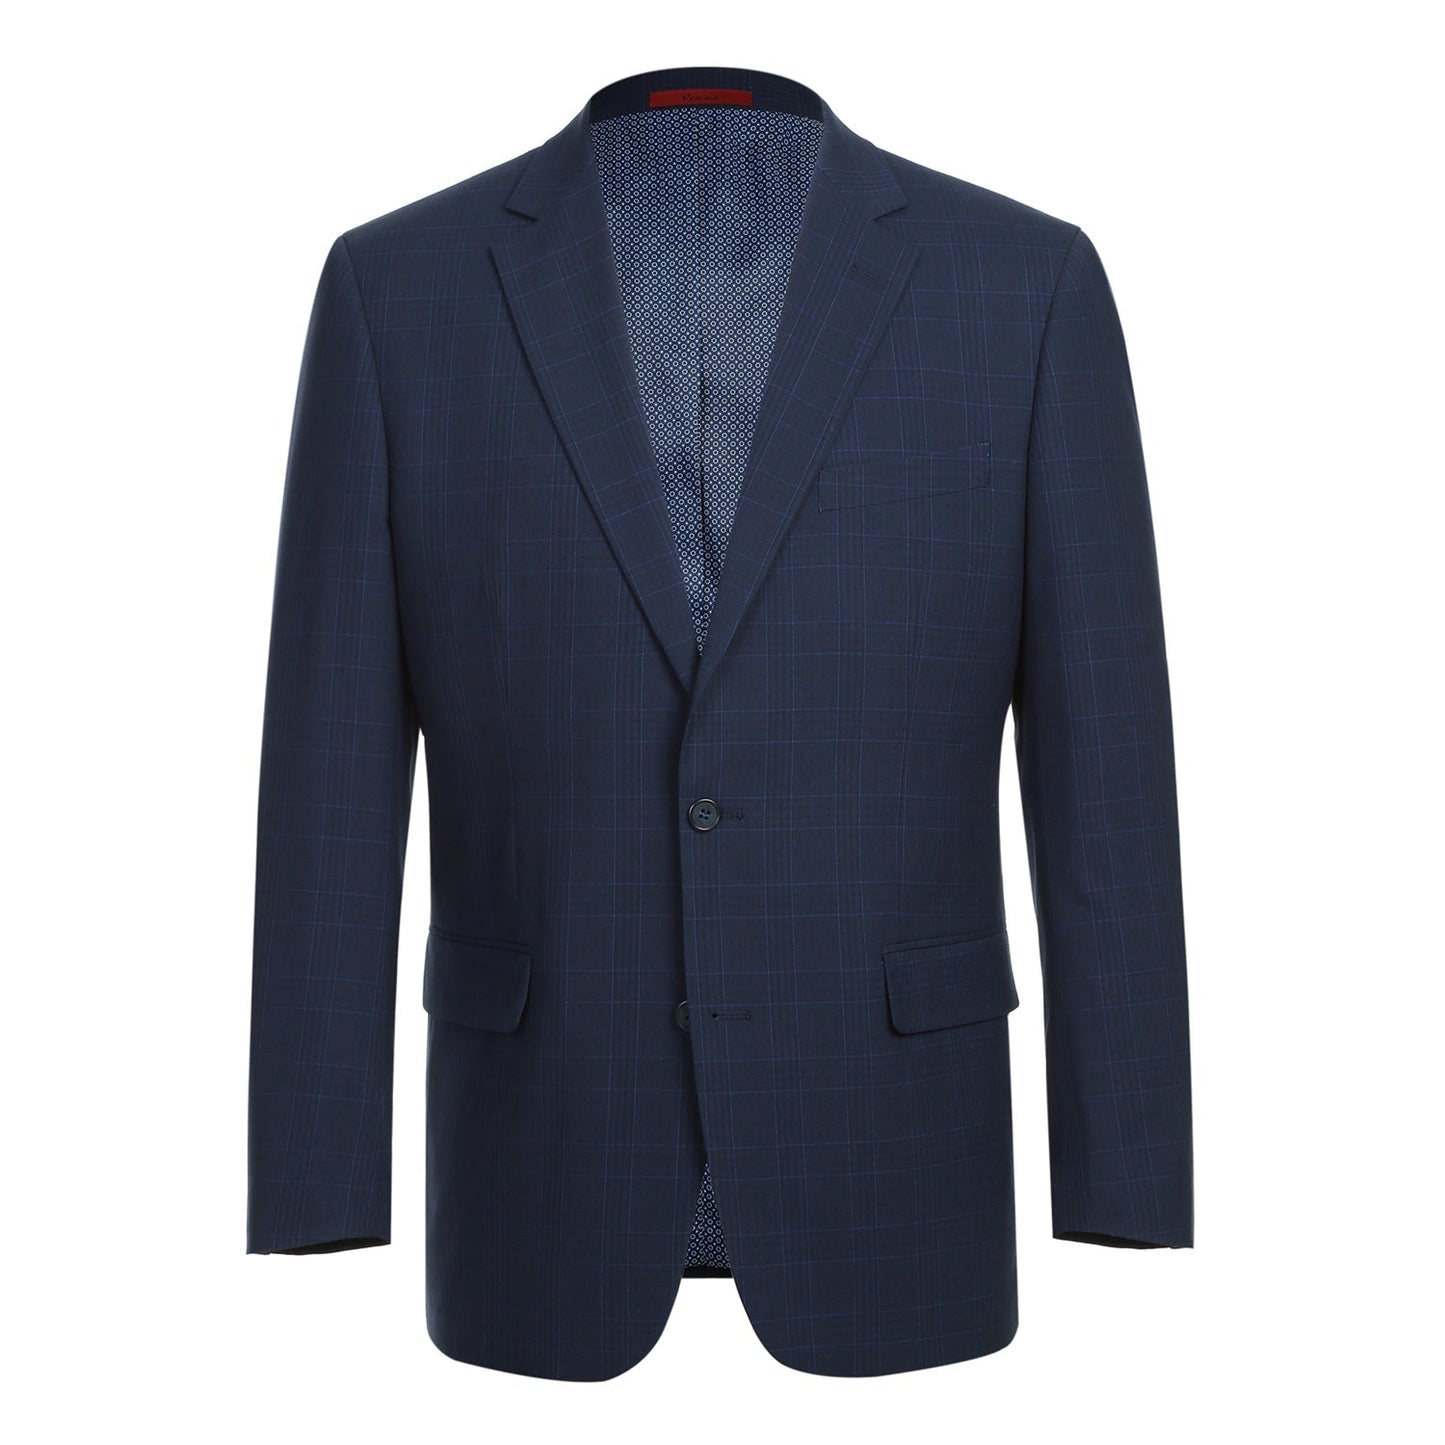 293-26 Men's Classic Fit Checked Suits